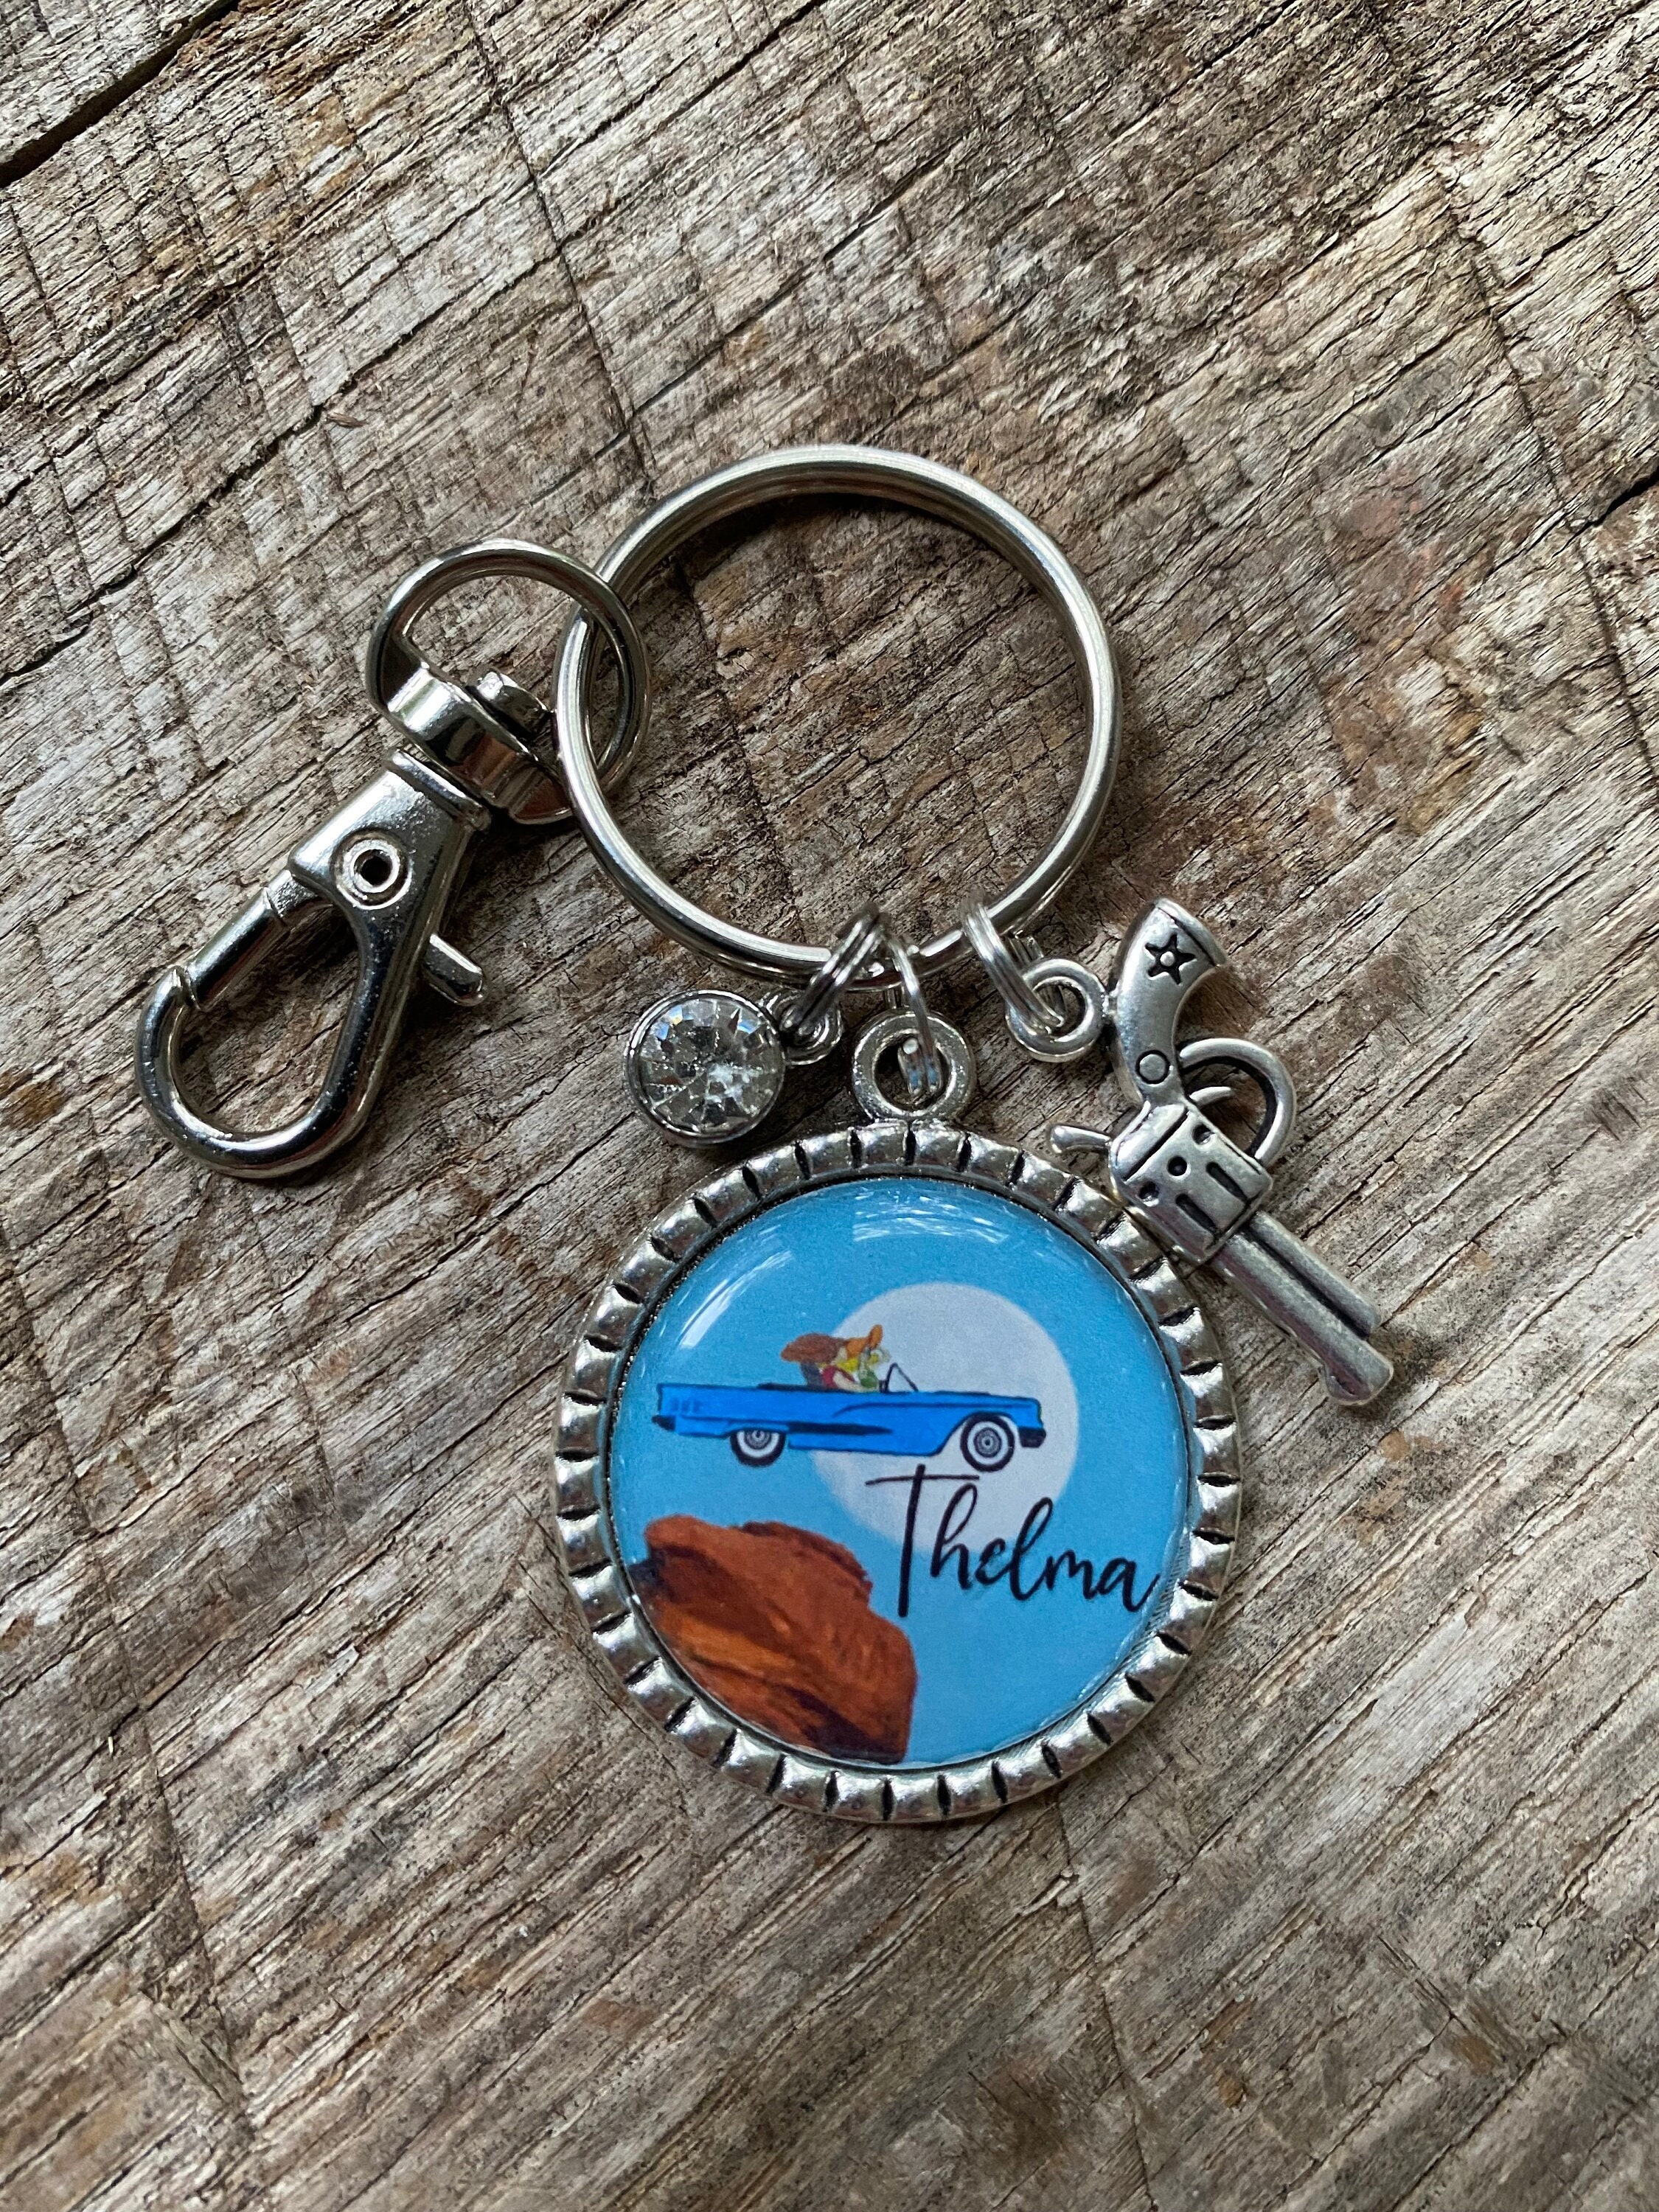 LParkin You are The Thelma to My Louise Best Friends Keychains